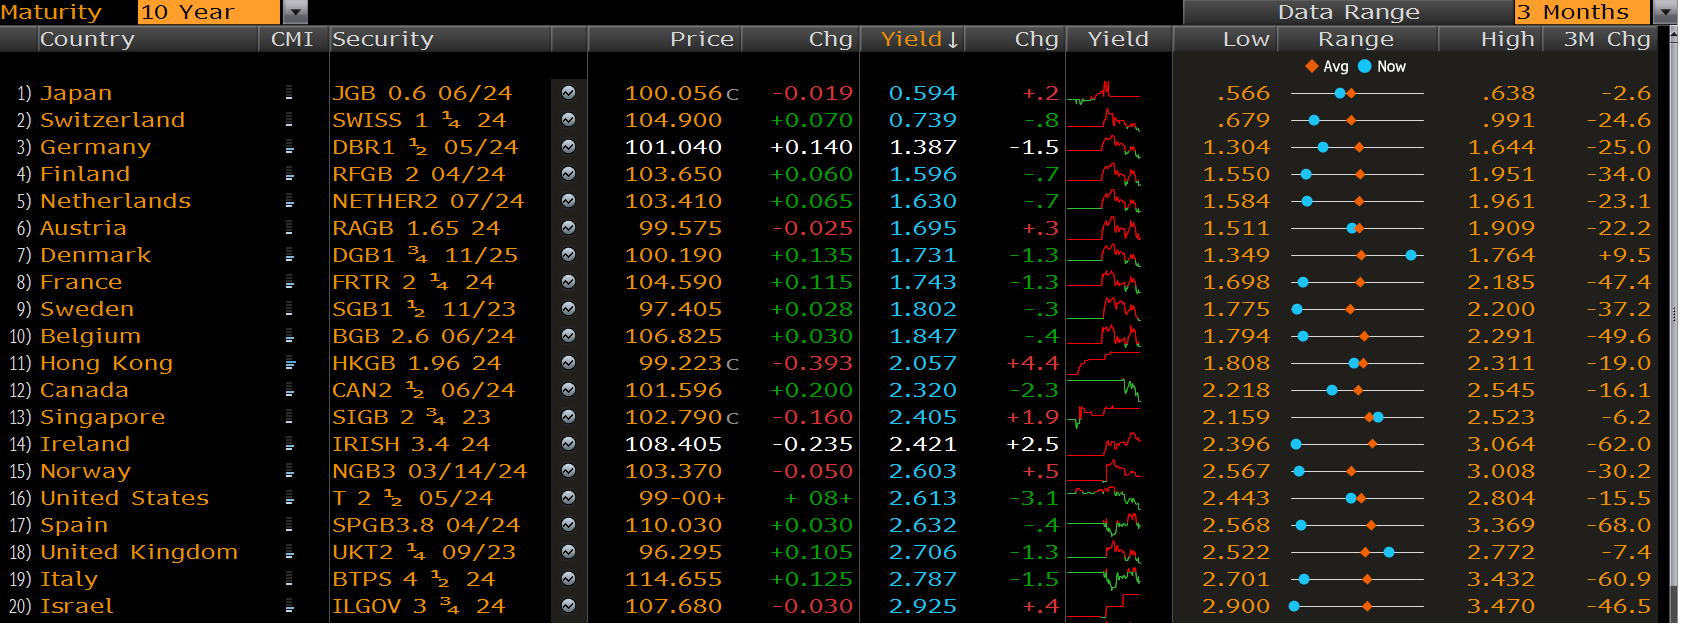 http://www.ritholtz.com/blog/wp-content/uploads/2014/06/10-year-yield-around-the-globe.png